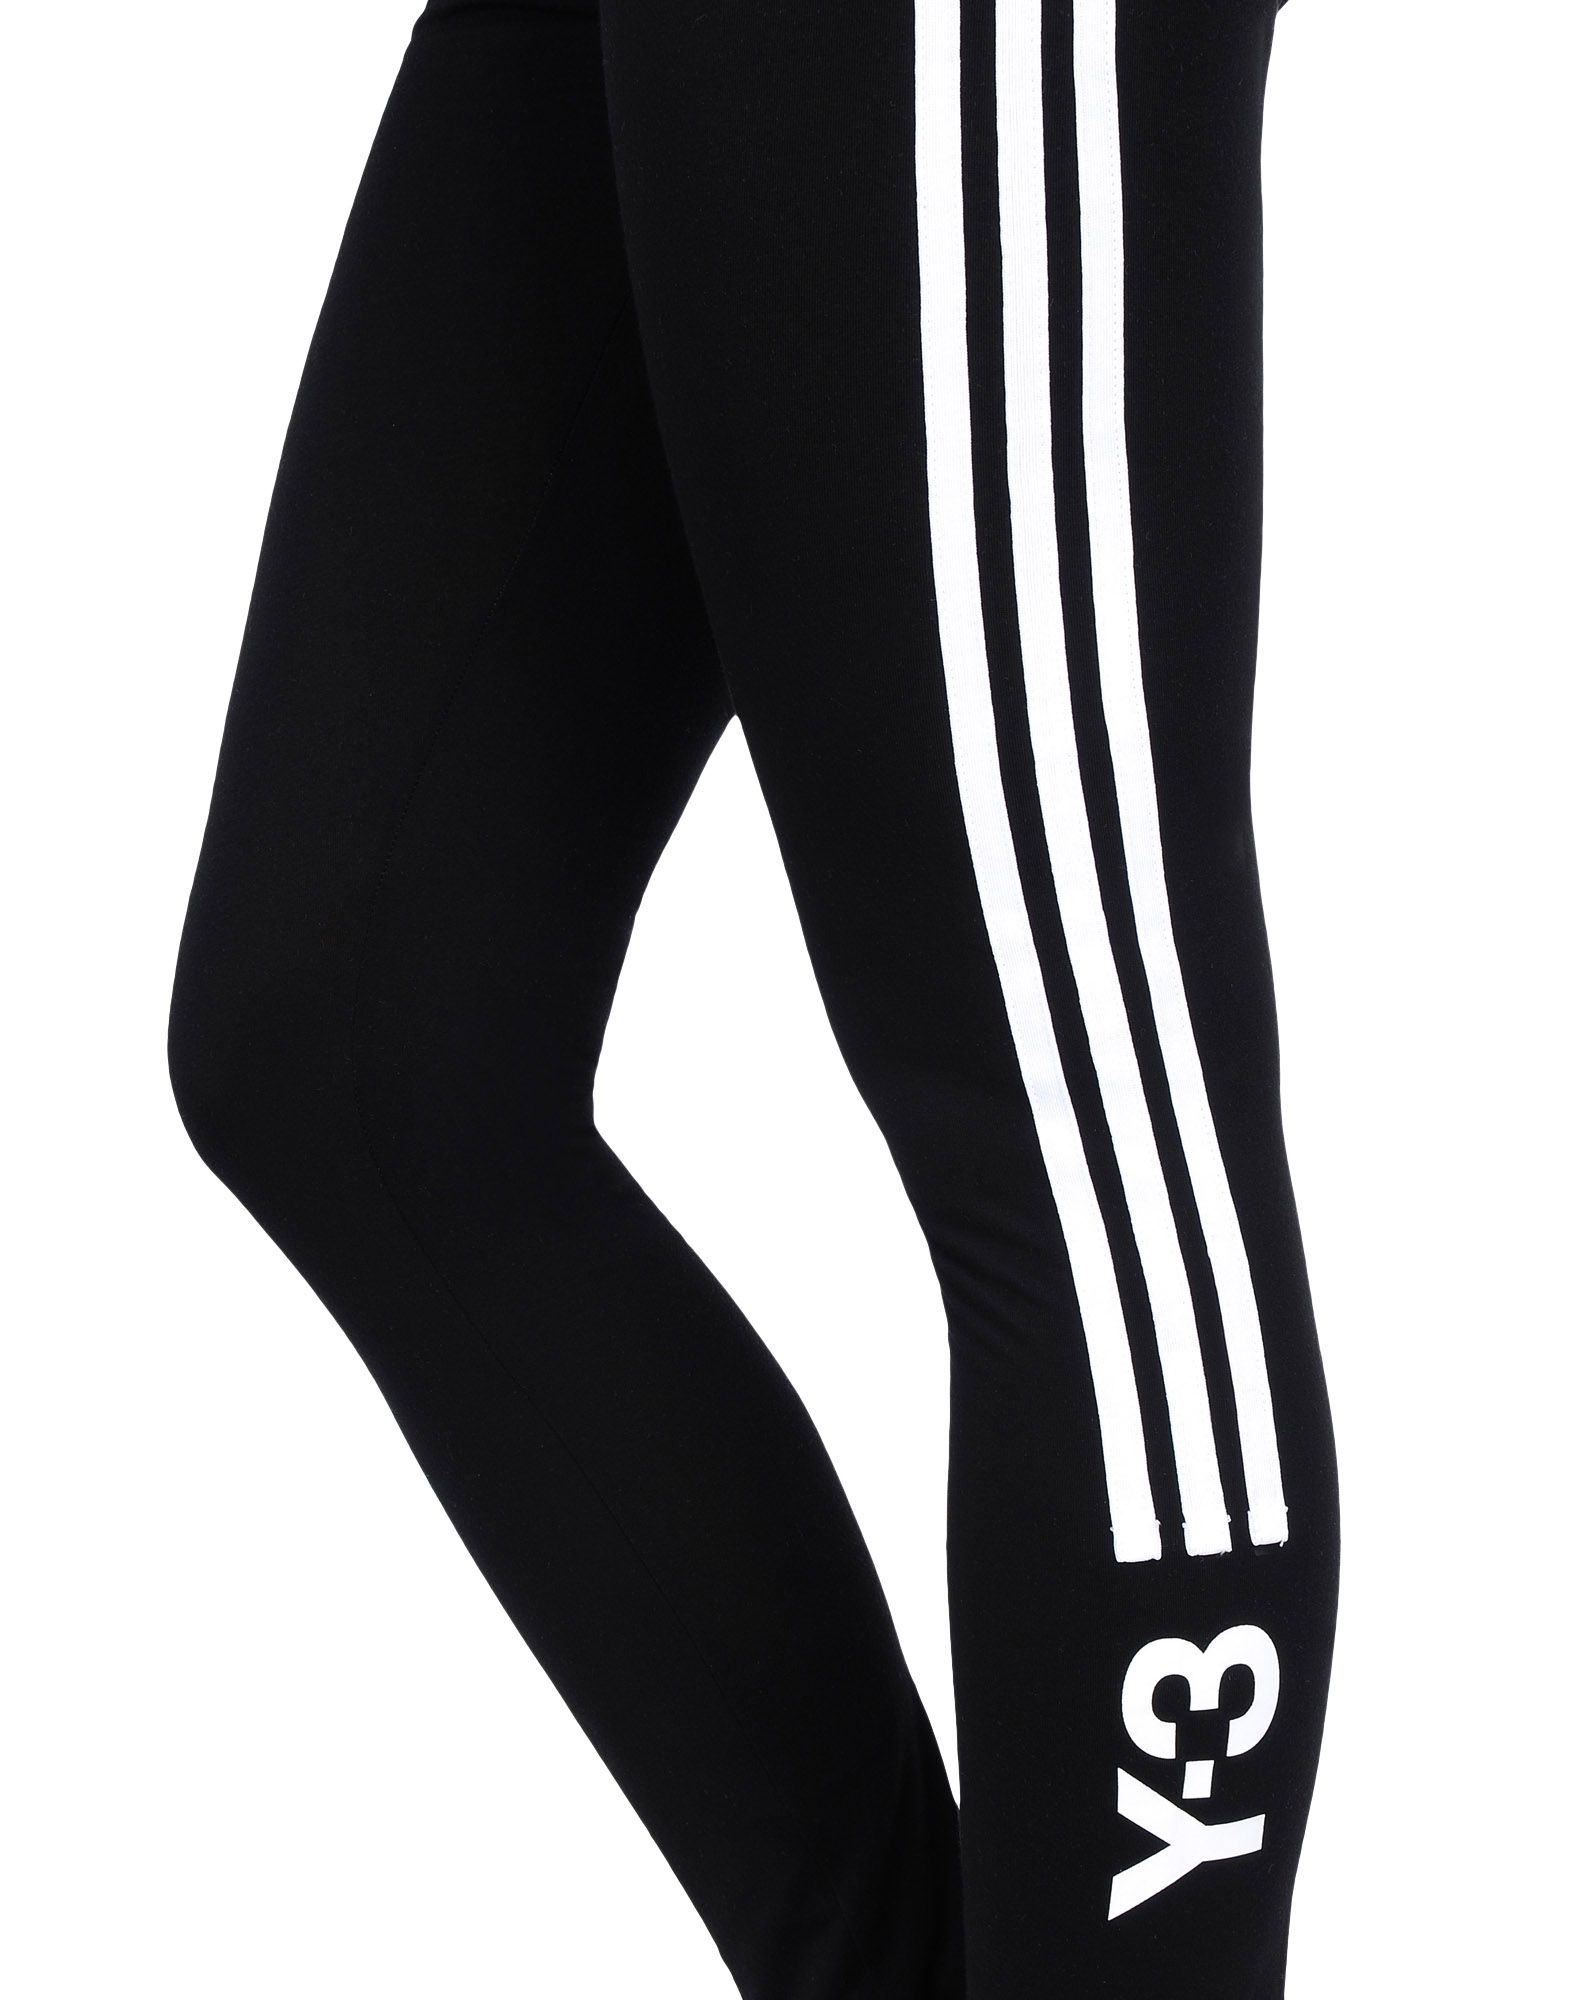 Y 3 LUX TRACK LEGGING for Women | Adidas Y-3 Official Store